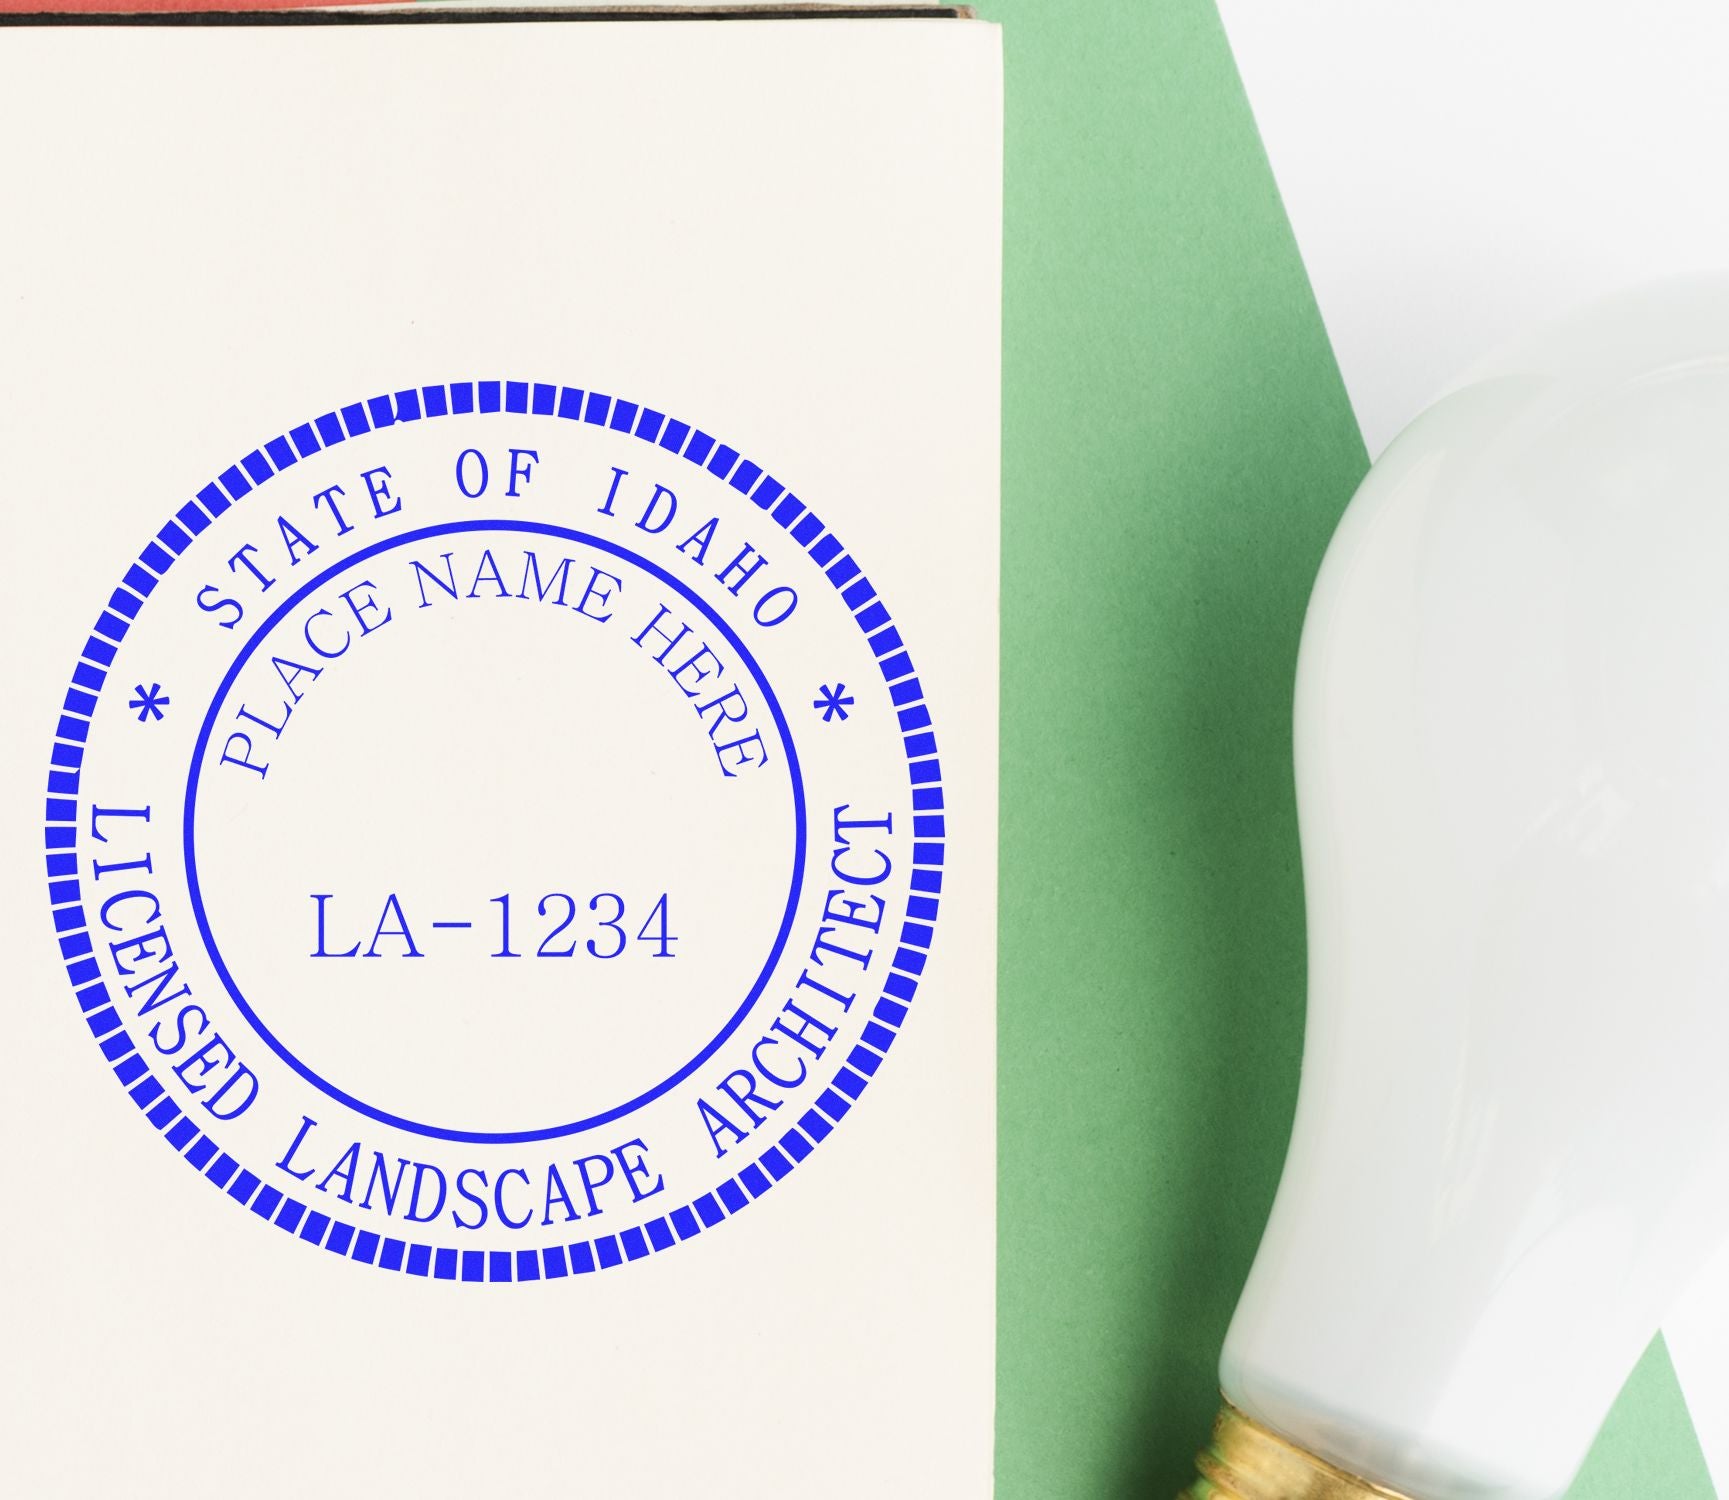 The main image for the Premium MaxLight Pre-Inked Idaho Landscape Architectural Stamp depicting a sample of the imprint and electronic files